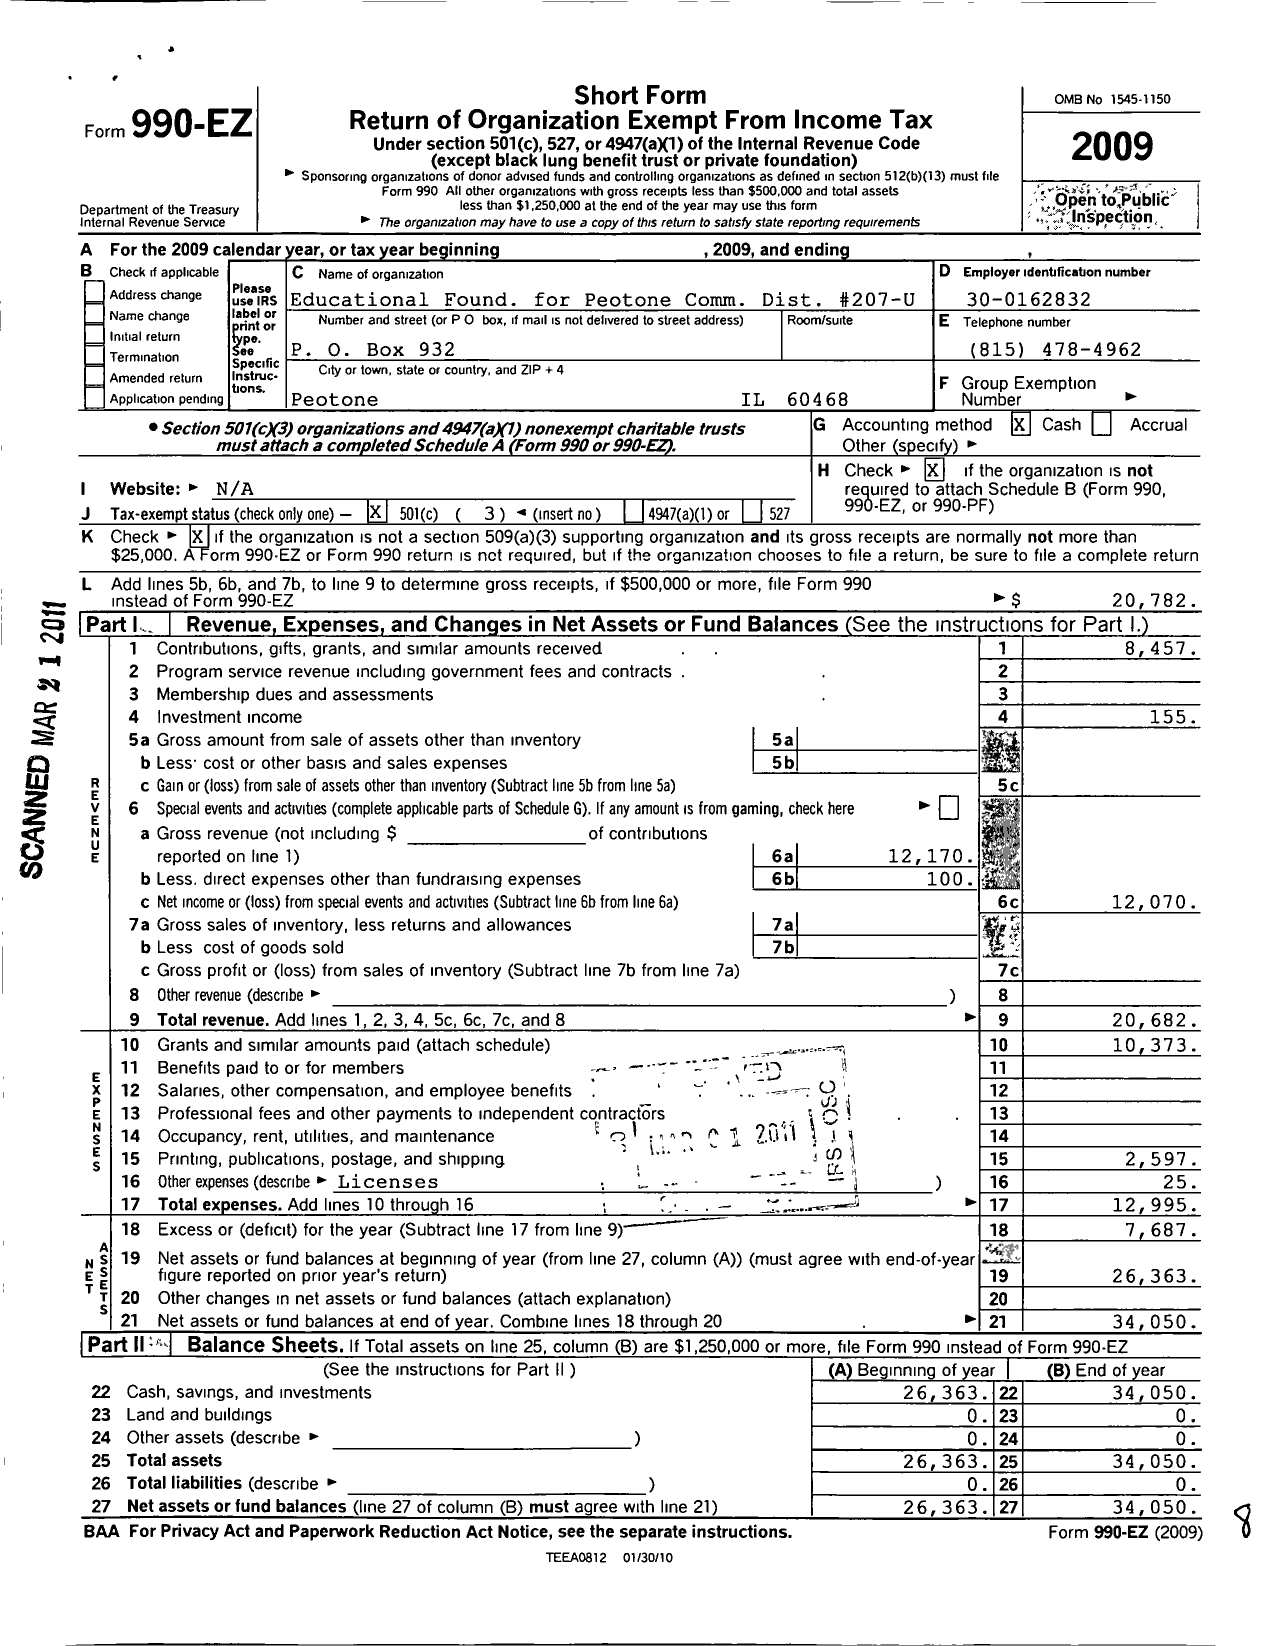 Image of first page of 2009 Form 990EZ for Educational Found for Peotone Comm Dist 207-u